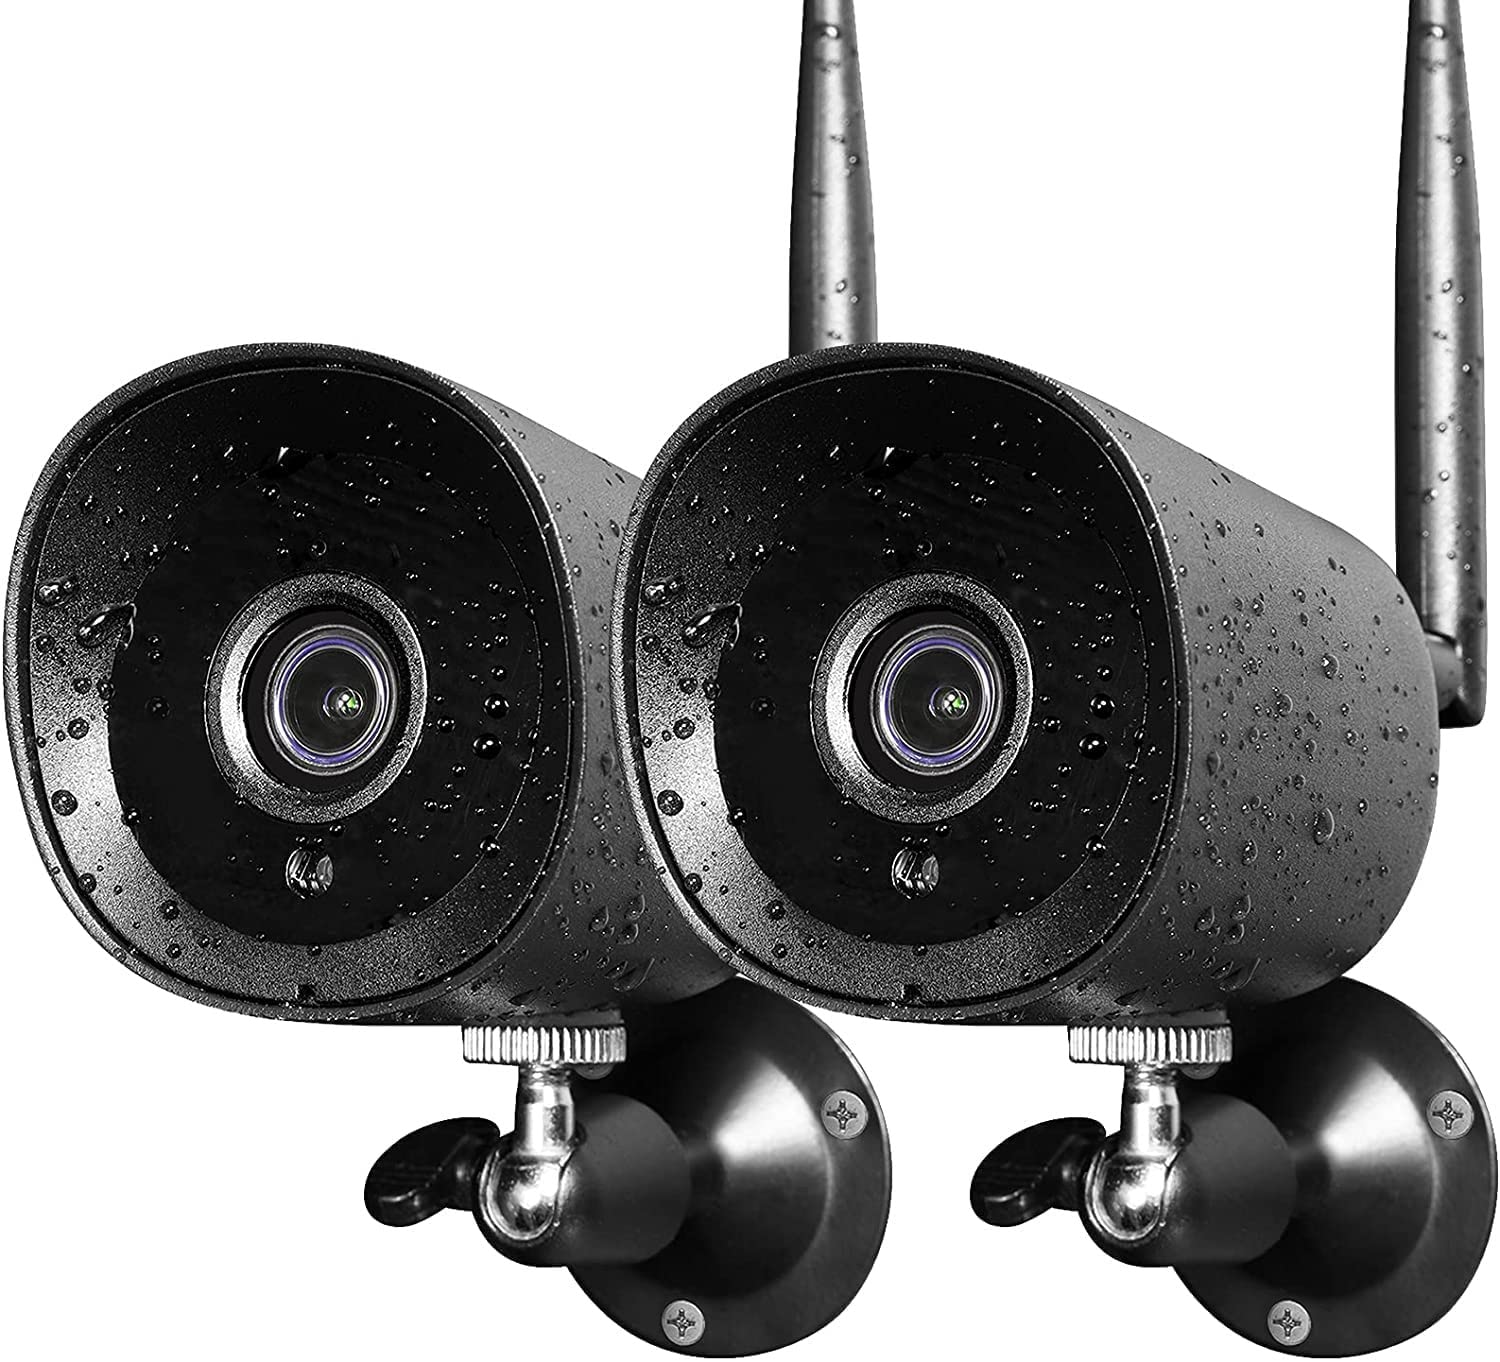 2pack WiFi Security Camera Outdoor2K Security Cameras for Home Security Night Vision Motion Detection IP66 Waterproof Cl